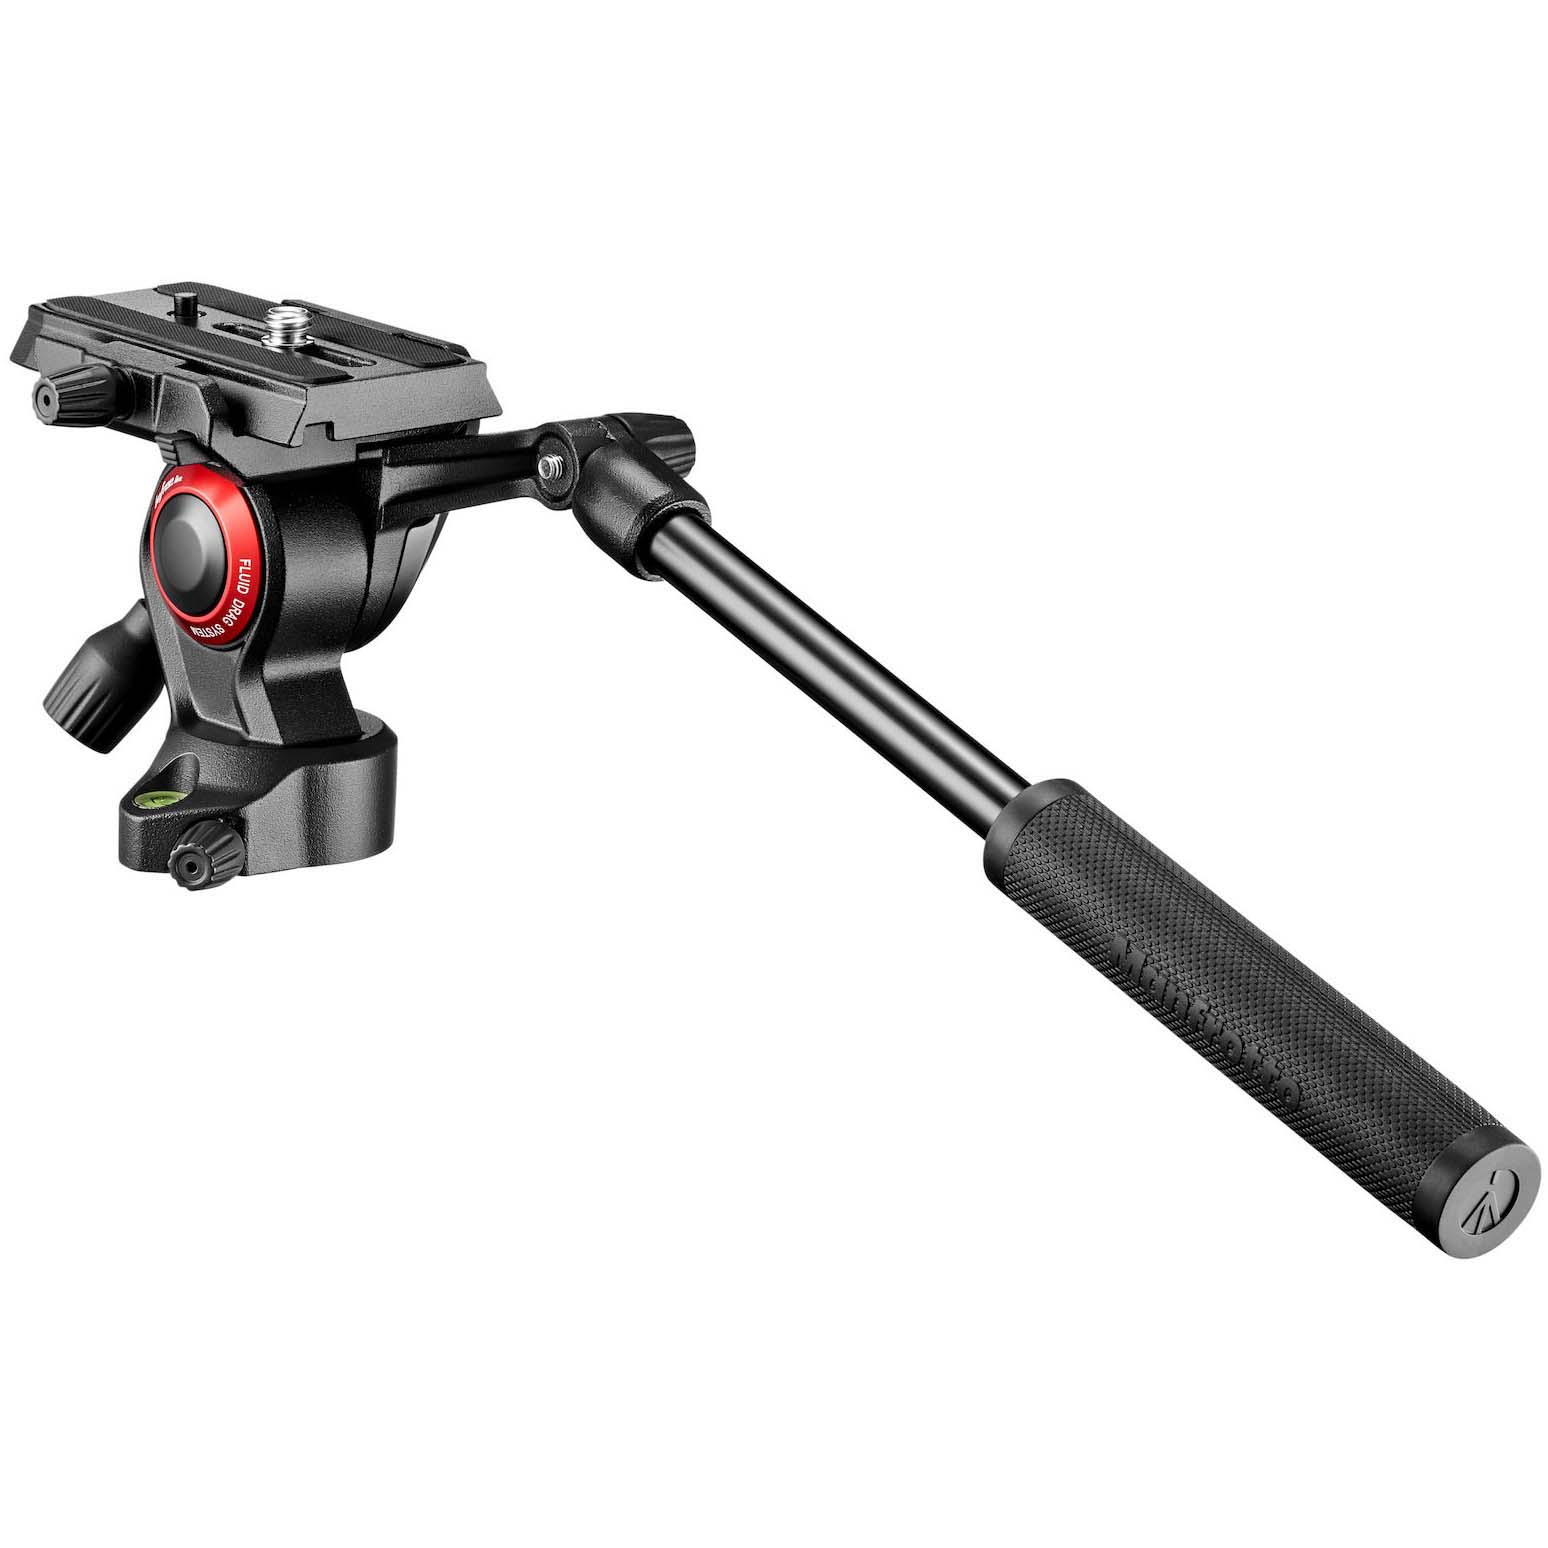 ROTULA MANFROTTO MVH400AH BEFREE LIVE MANFROTTO 